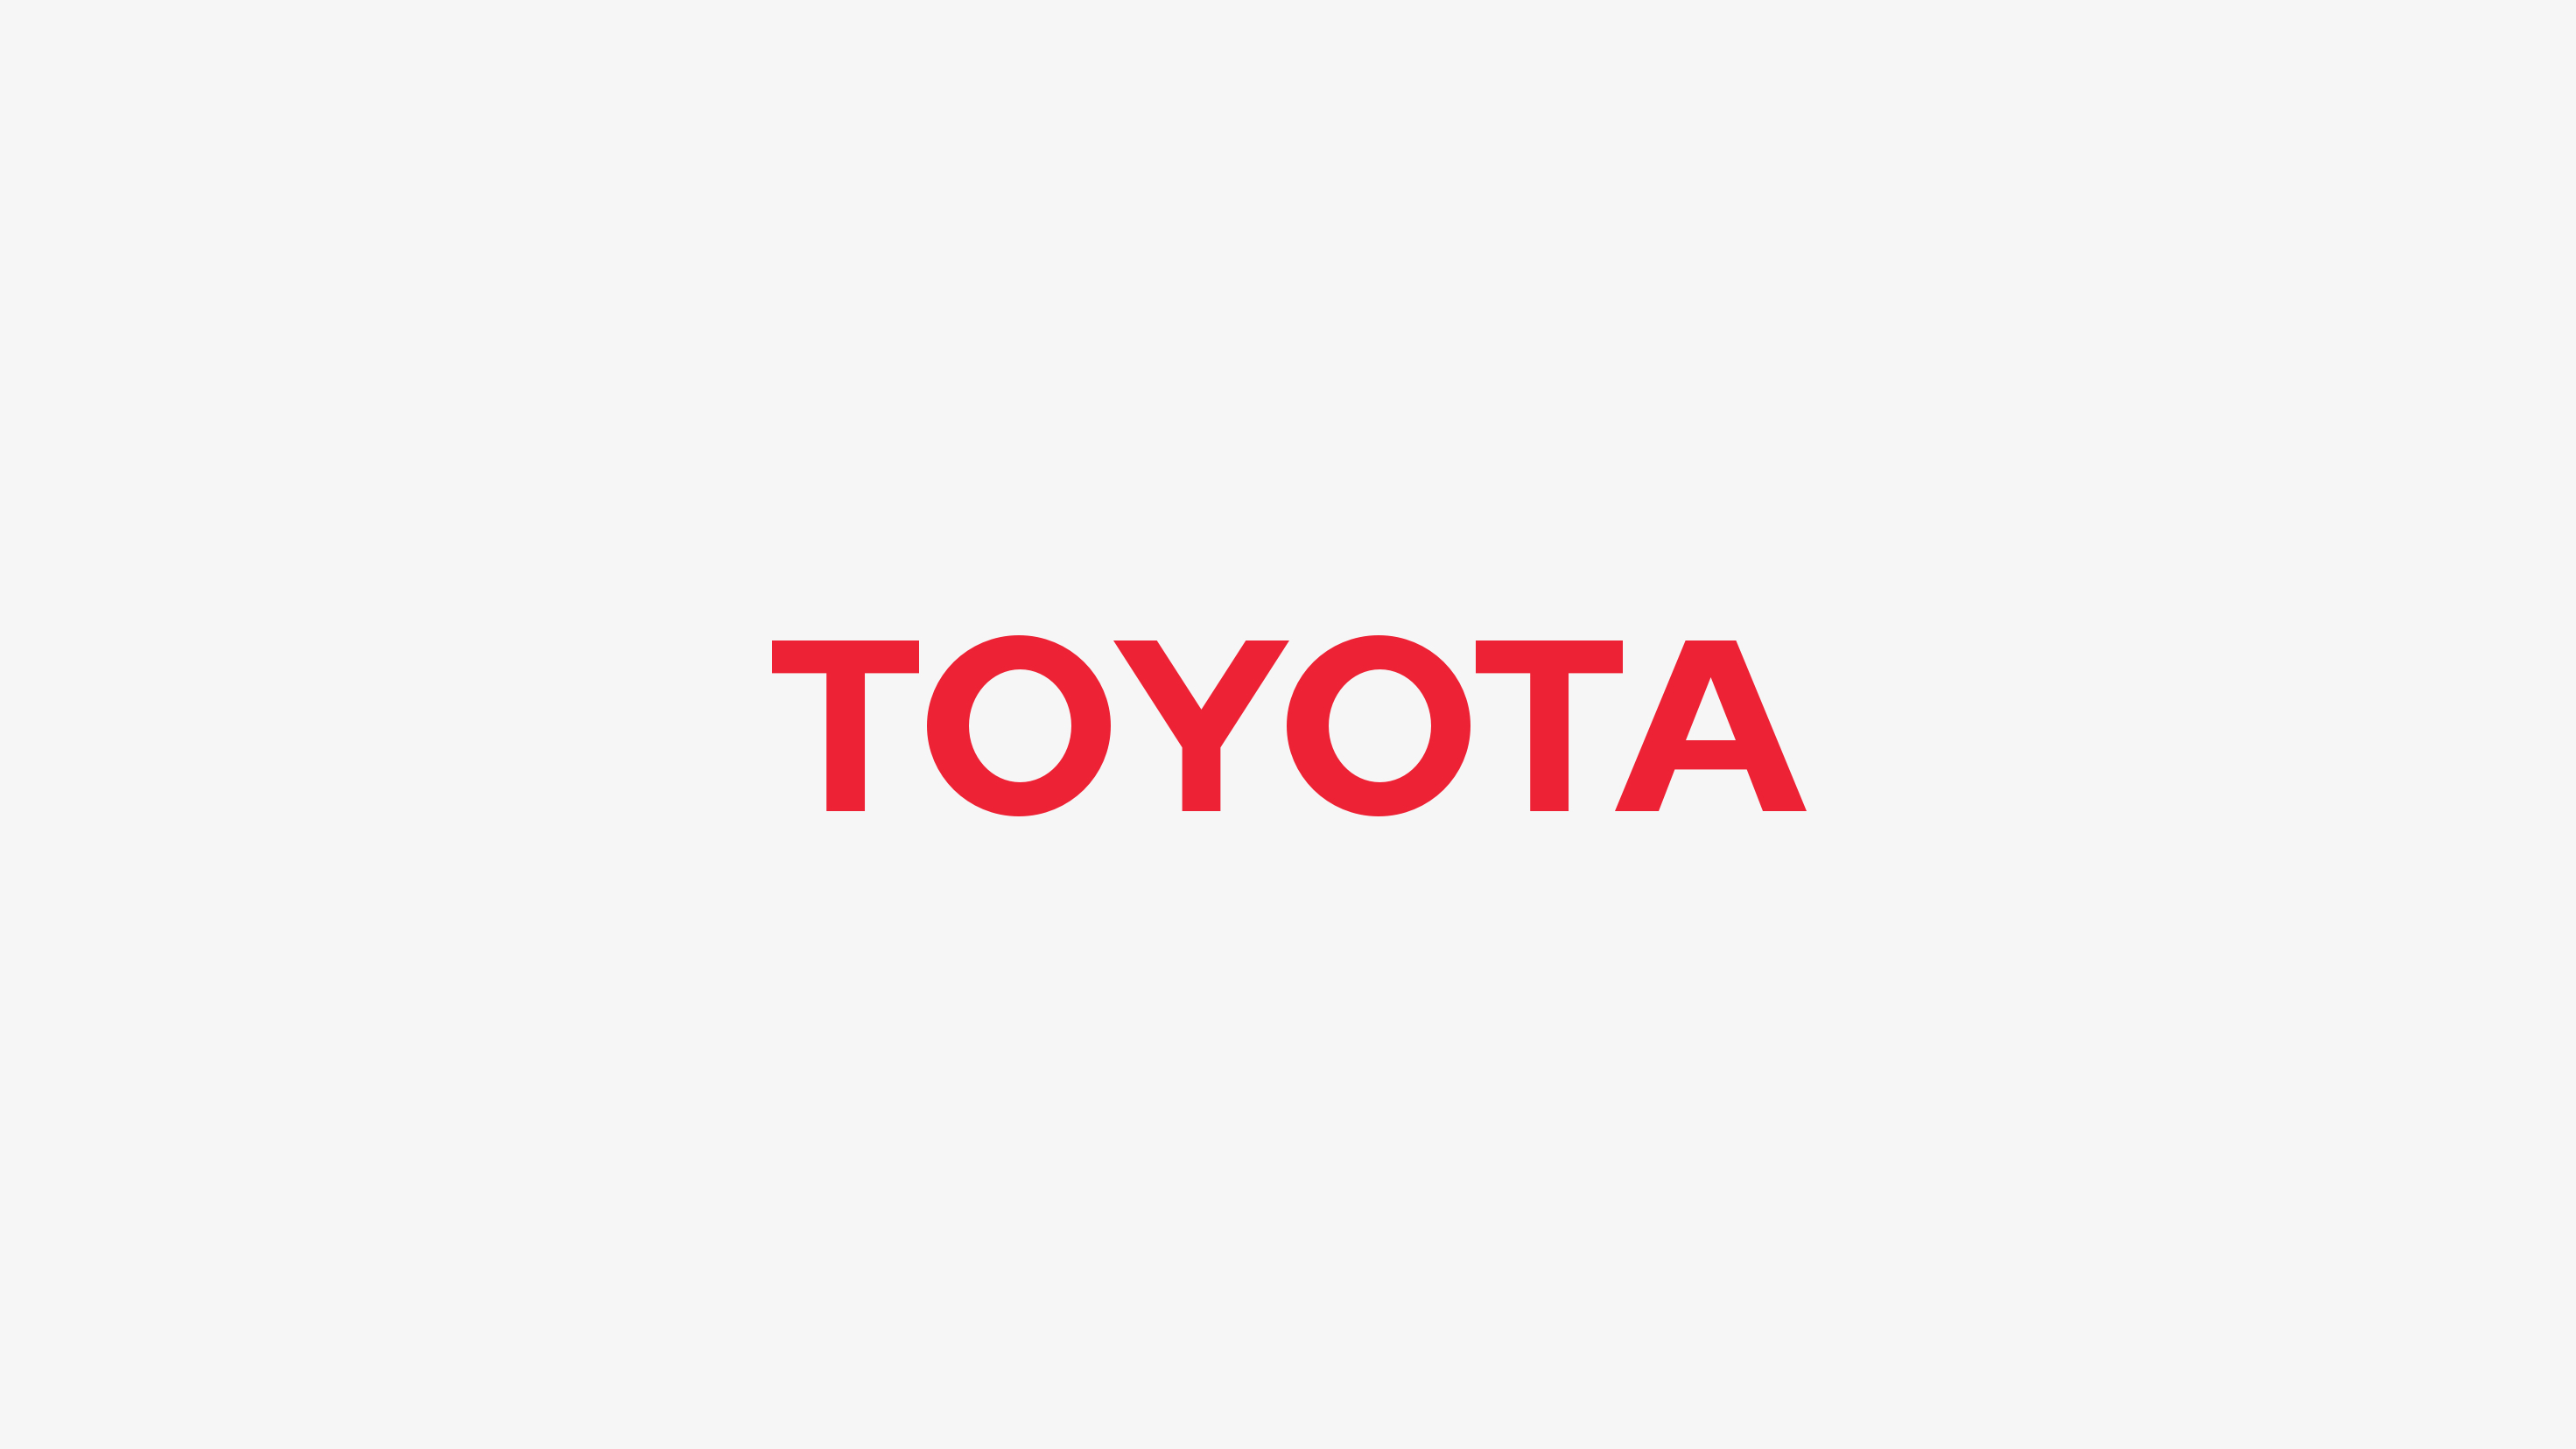 Toyota Camry – The Great Road